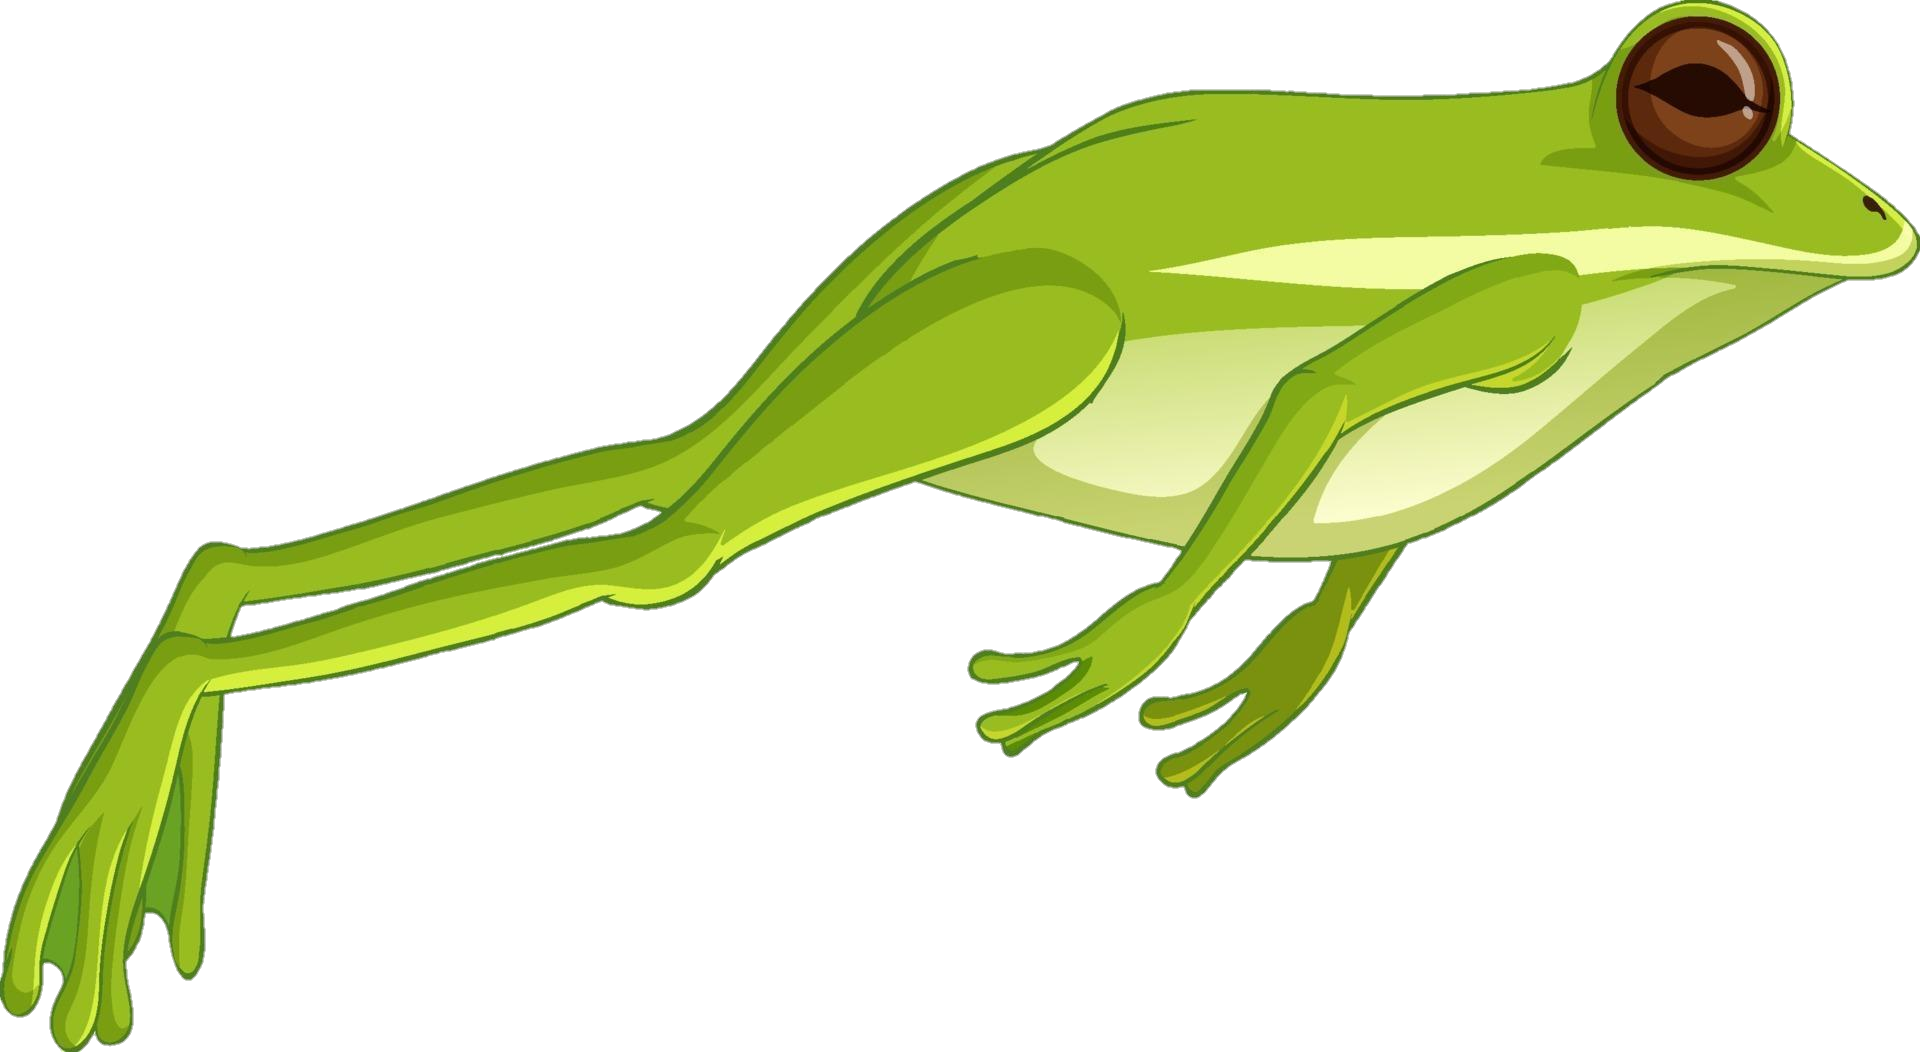 frog-png-image-from-pngfre-4